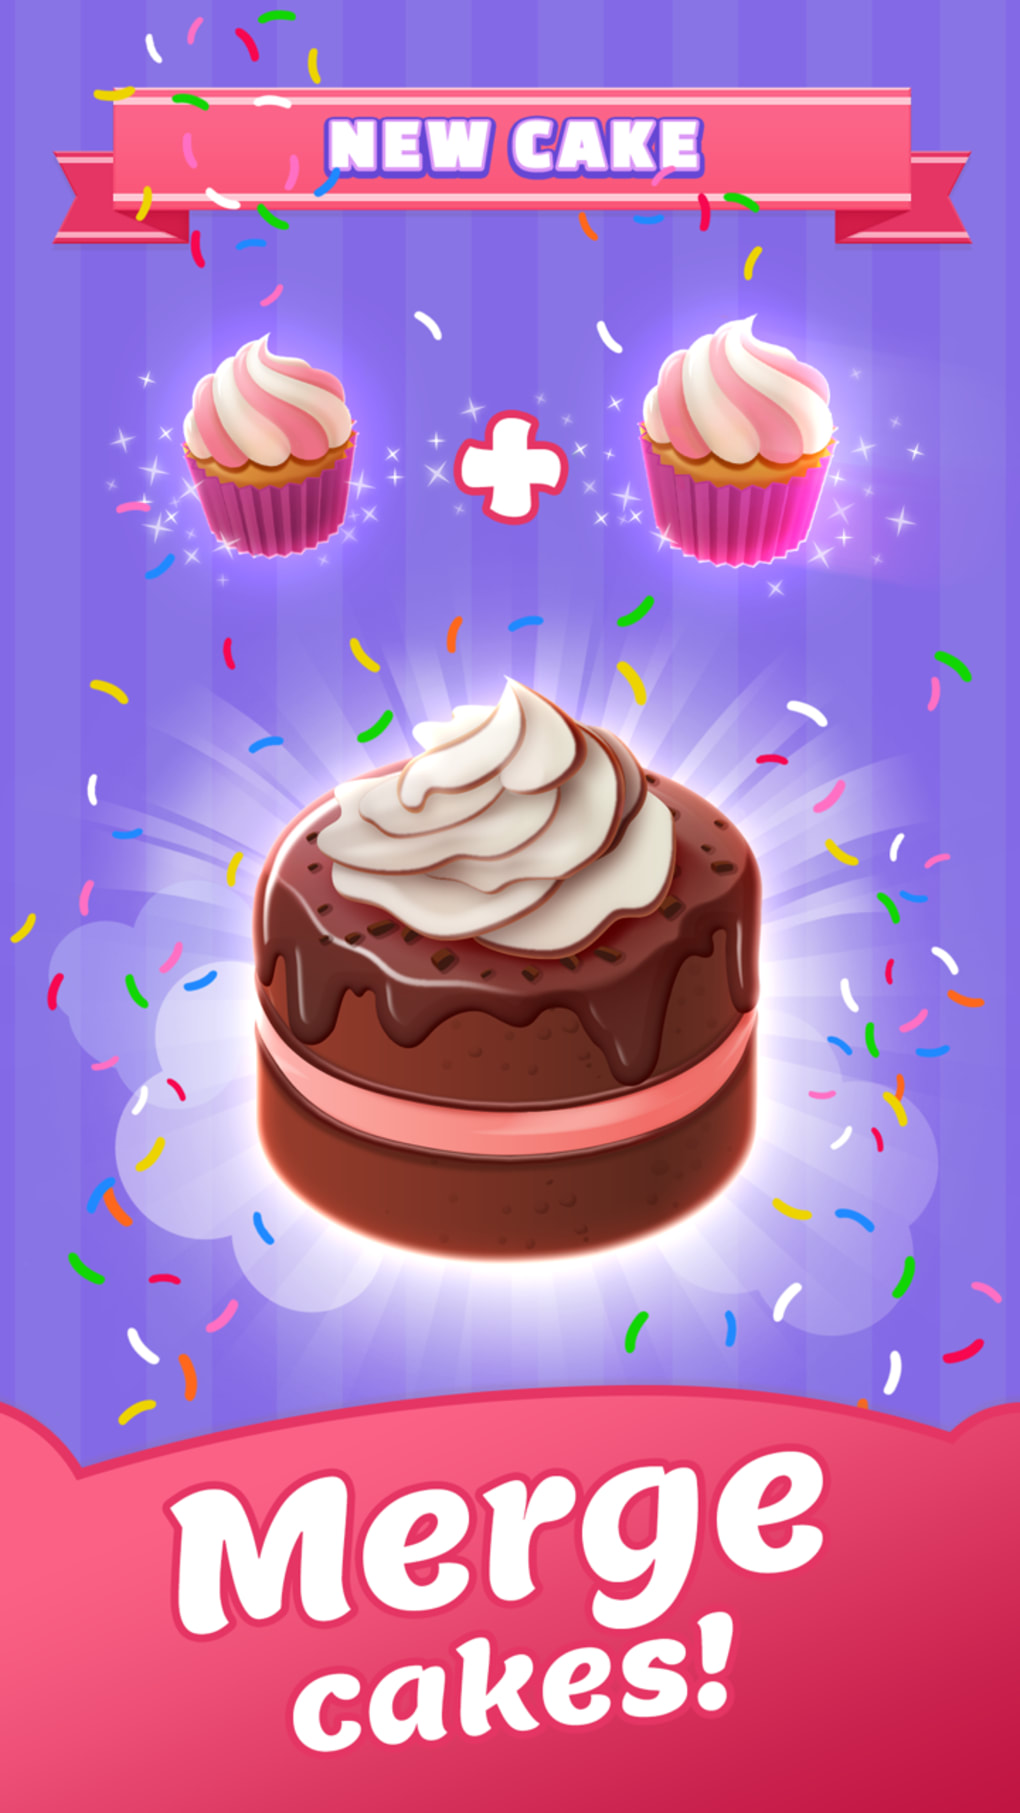 PlayHOG # 238 Hidden Object Games Free New - Christmas Cakes:Amazon.com:Appstore  for Android